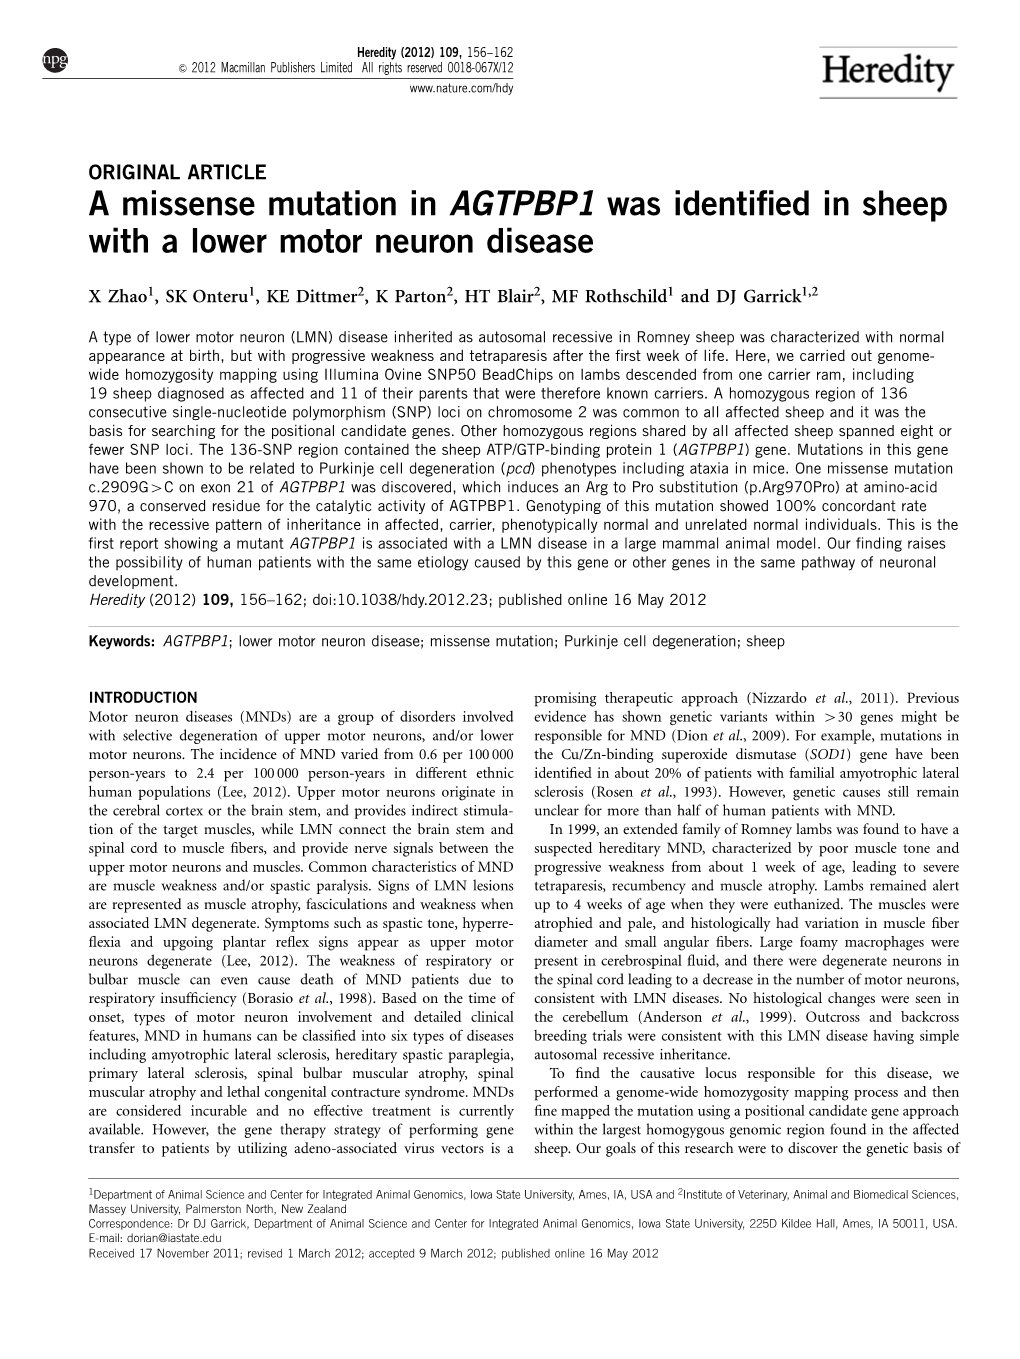 A Missense Mutation in AGTPBP1 Was Identified in Sheep with a Lower